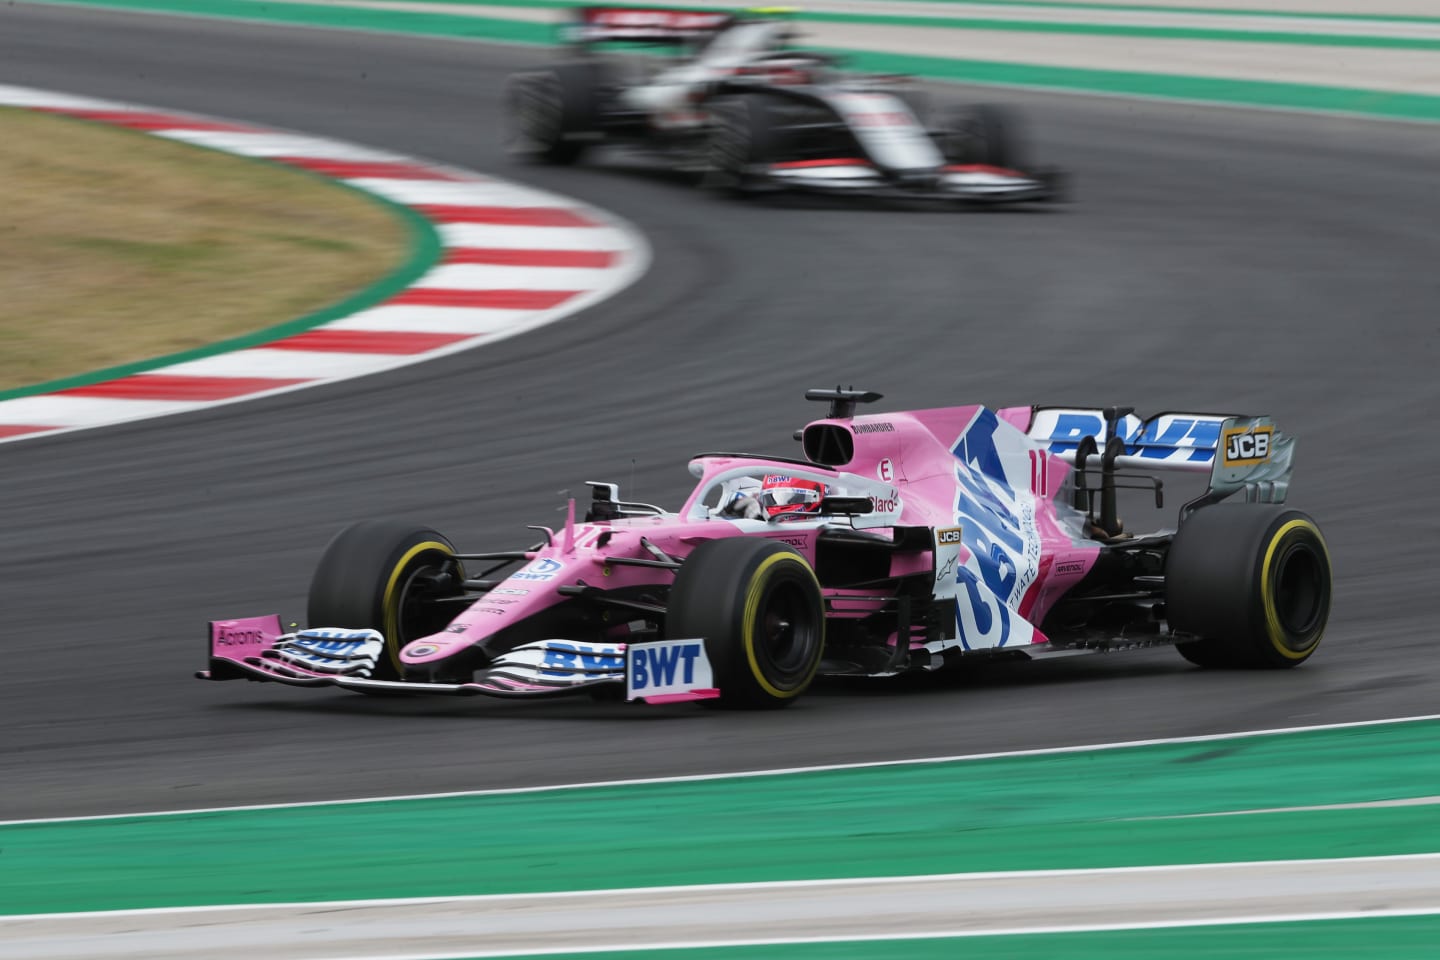 PORTIMAO, PORTUGAL - OCTOBER 25: Sergio Perez of Mexico driving the (11) Racing Point RP20 Mercedes on track during the F1 Grand Prix of Portugal at Autodromo Internacional do Algarve on October 25, 2020 in Portimao, Portugal. (Photo by Jose Sena Goulao - Pool/Getty Images)